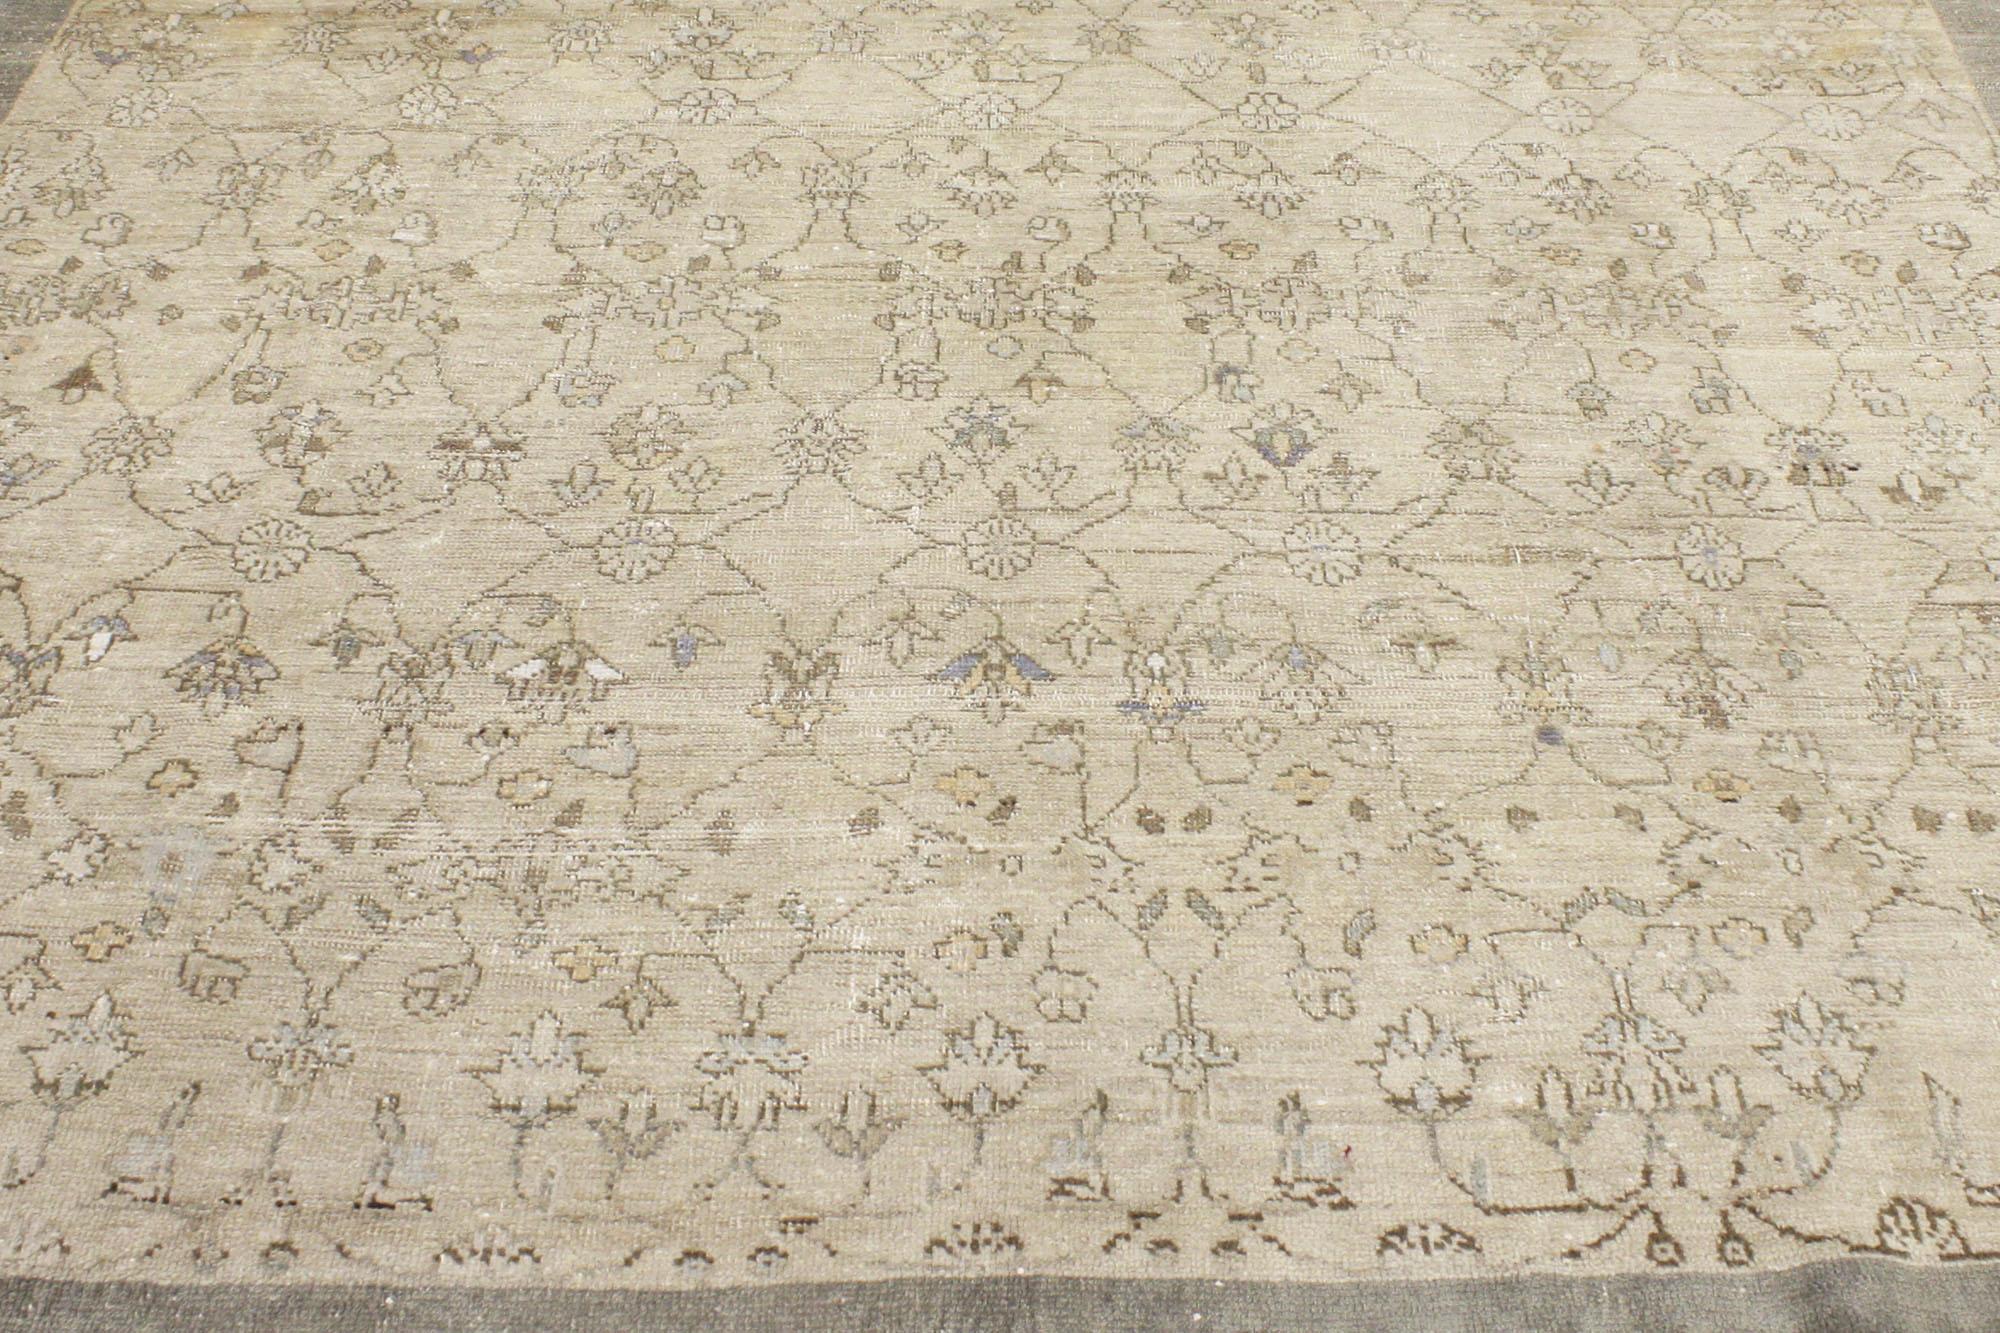 Rustic Distressed Vintage Turkish Oushak Rug, Shabby Chic Meets Weathered Beauty